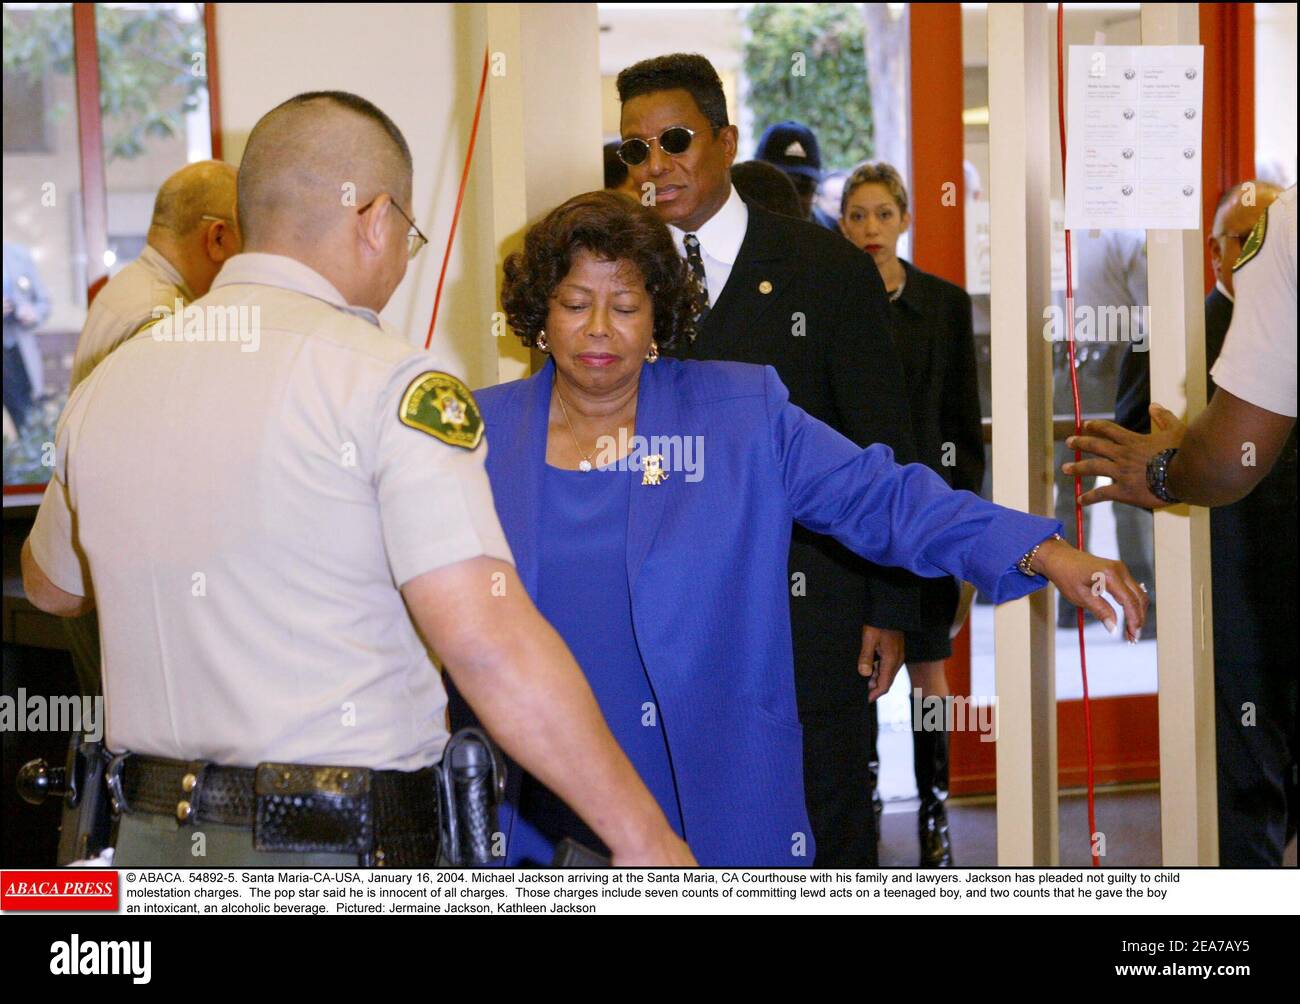 © ABACA. 54892-5. Santa Maria-CA-USA, January 16, 2004. Michael Jackson arriving at the Santa Maria, CA Courthouse with his family and lawyers. Jackson has pleaded not guilty to child molestation charges. The pop star said he is innocent of all charges. Those charges include seven counts of committing lewd acts on a teenaged boy, and two counts that he gave the boy an intoxicant, an alcoholic beverage. Pictured: Jermaine Jackson, Katherine Jackson Stock Photo